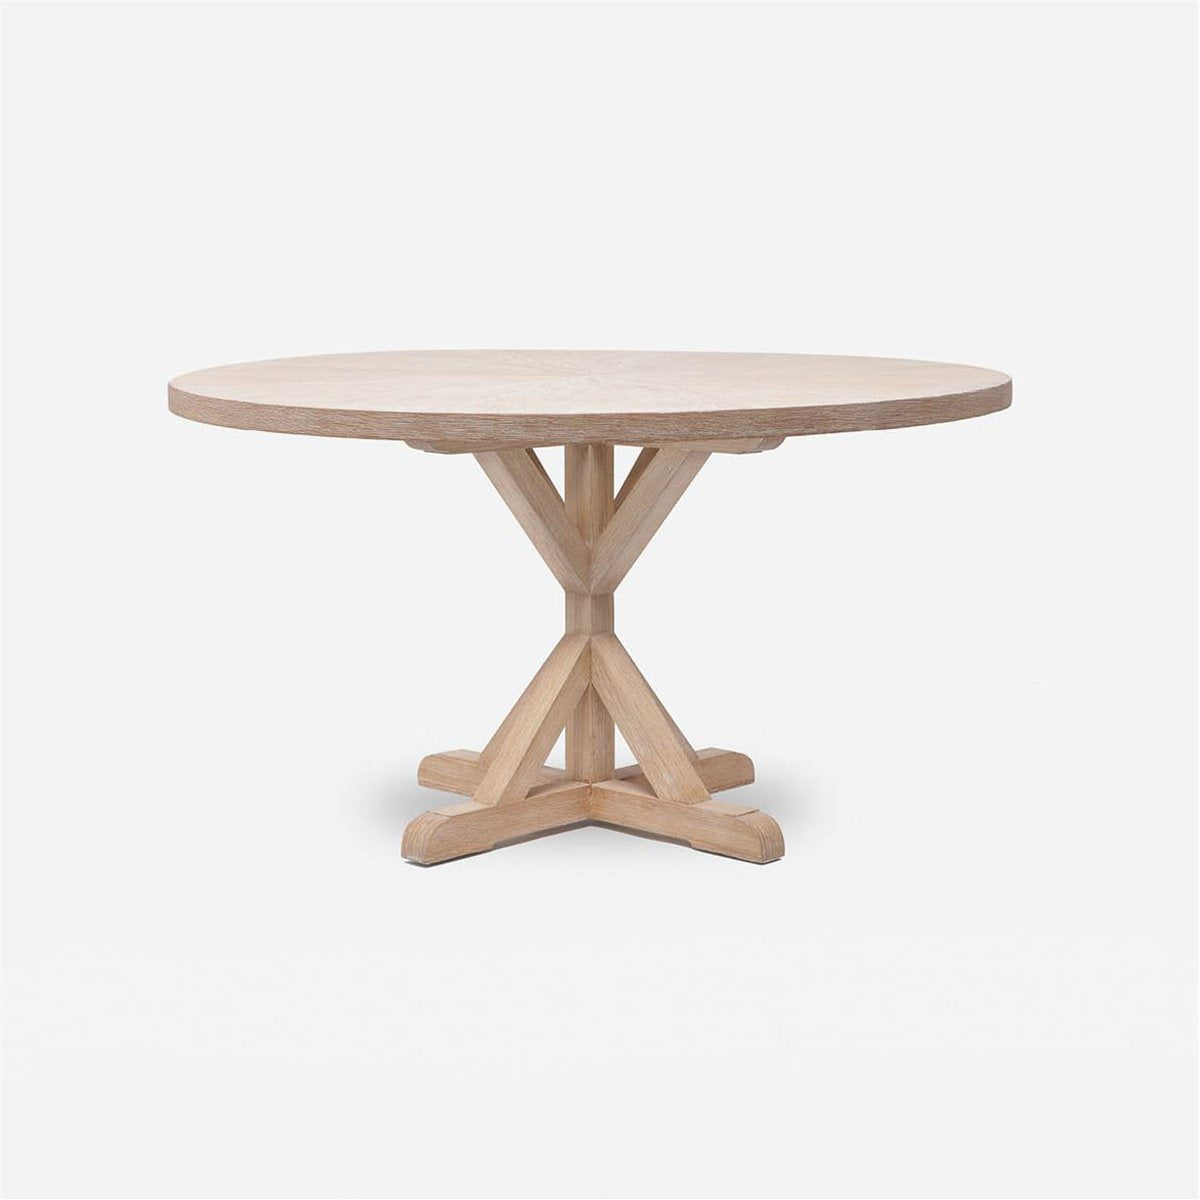 Made Goods Dane Round Farm Dining Table in Oak